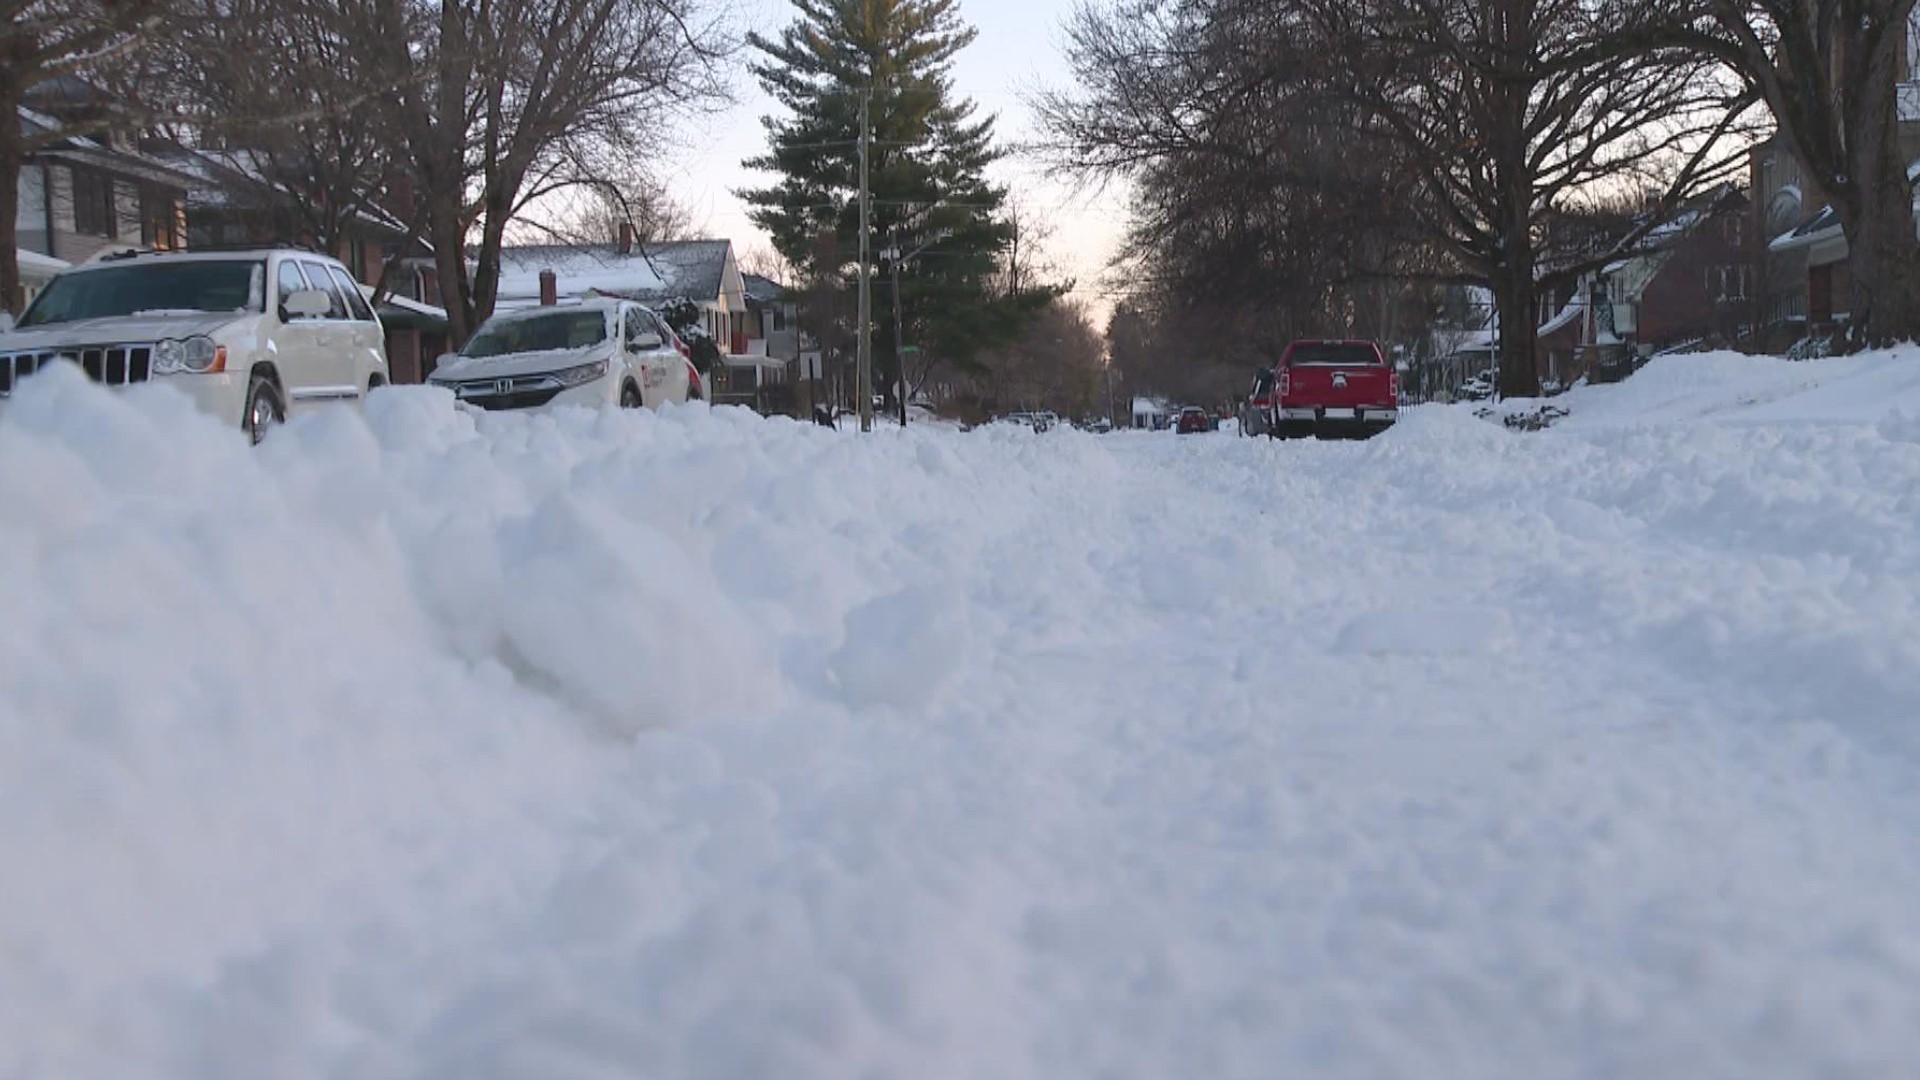 Indiana is dealing with sub-freezing temperatures Saturday while plow crews work to clear snow.